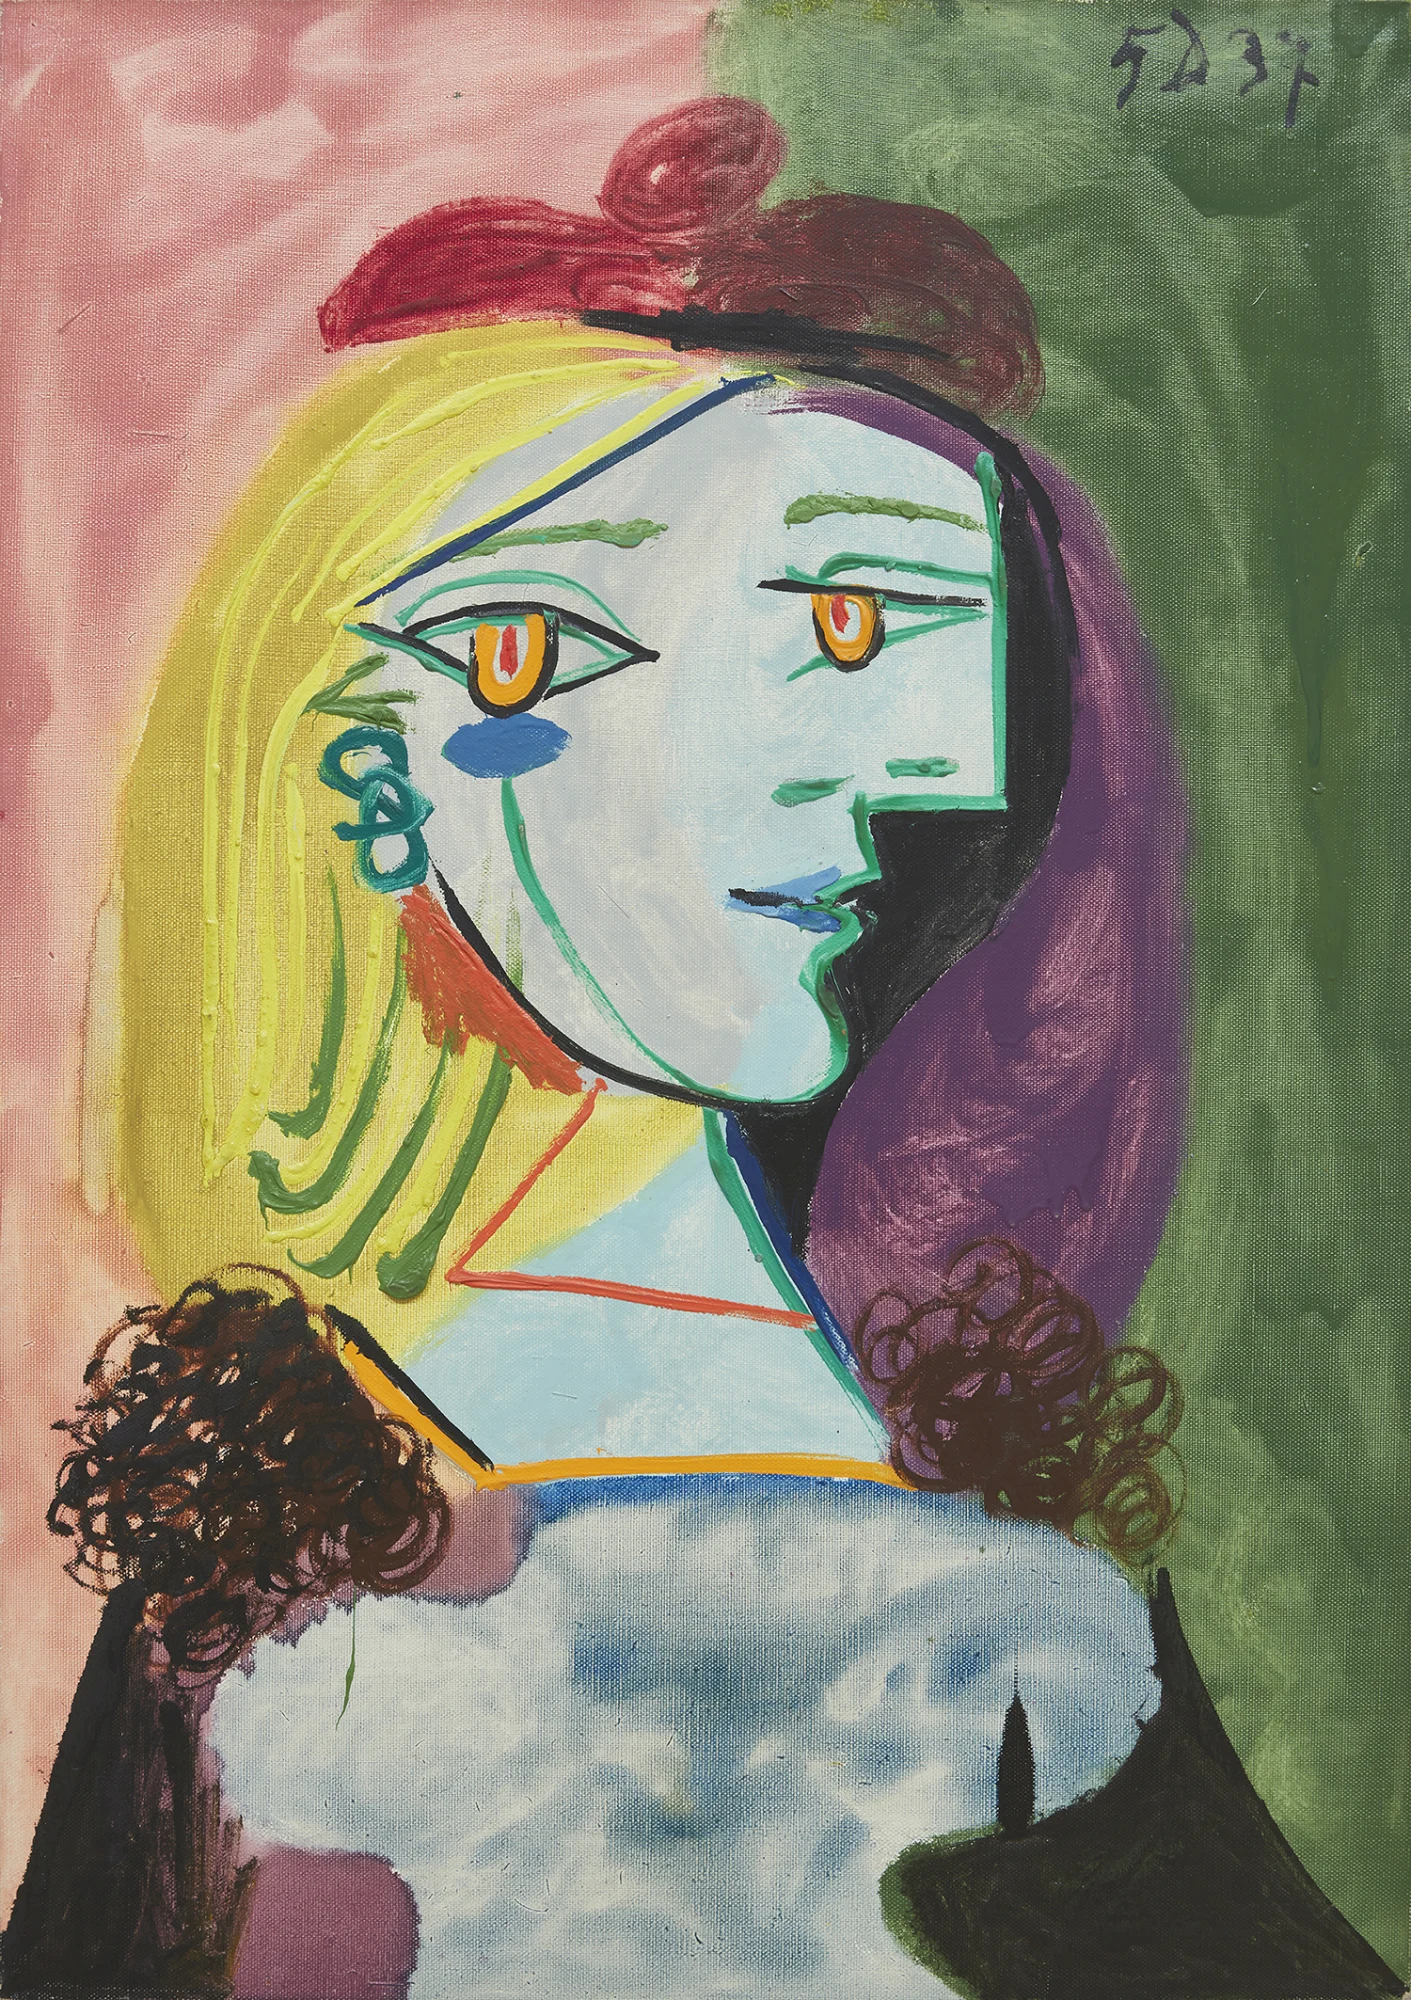 The Wick - Pablo Picasso, Femme au beret rouge à pompon 1937
Oil on canvas
65.1 x 46 cm 
Courtesy of Estate of Pablo Picasso and Artists Rights Society (ARS), New York
